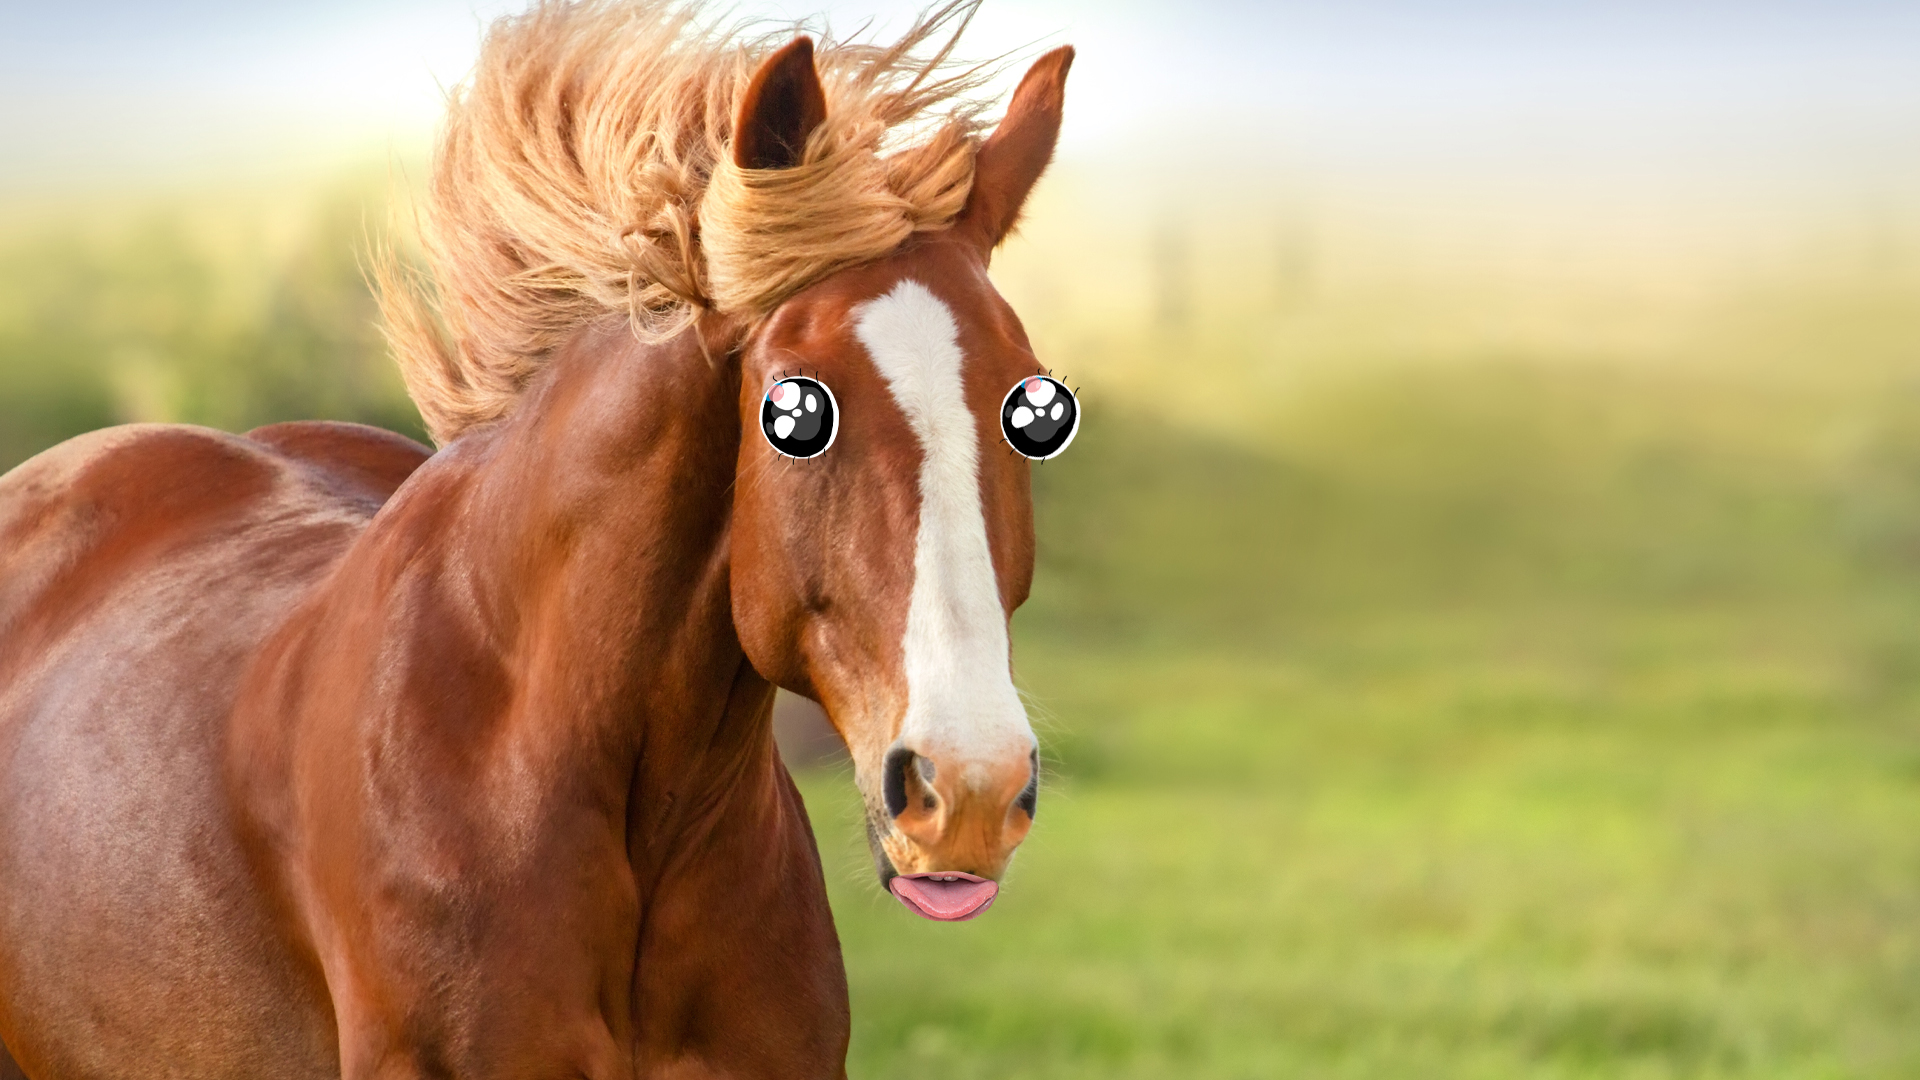 A horse with long flowing hair